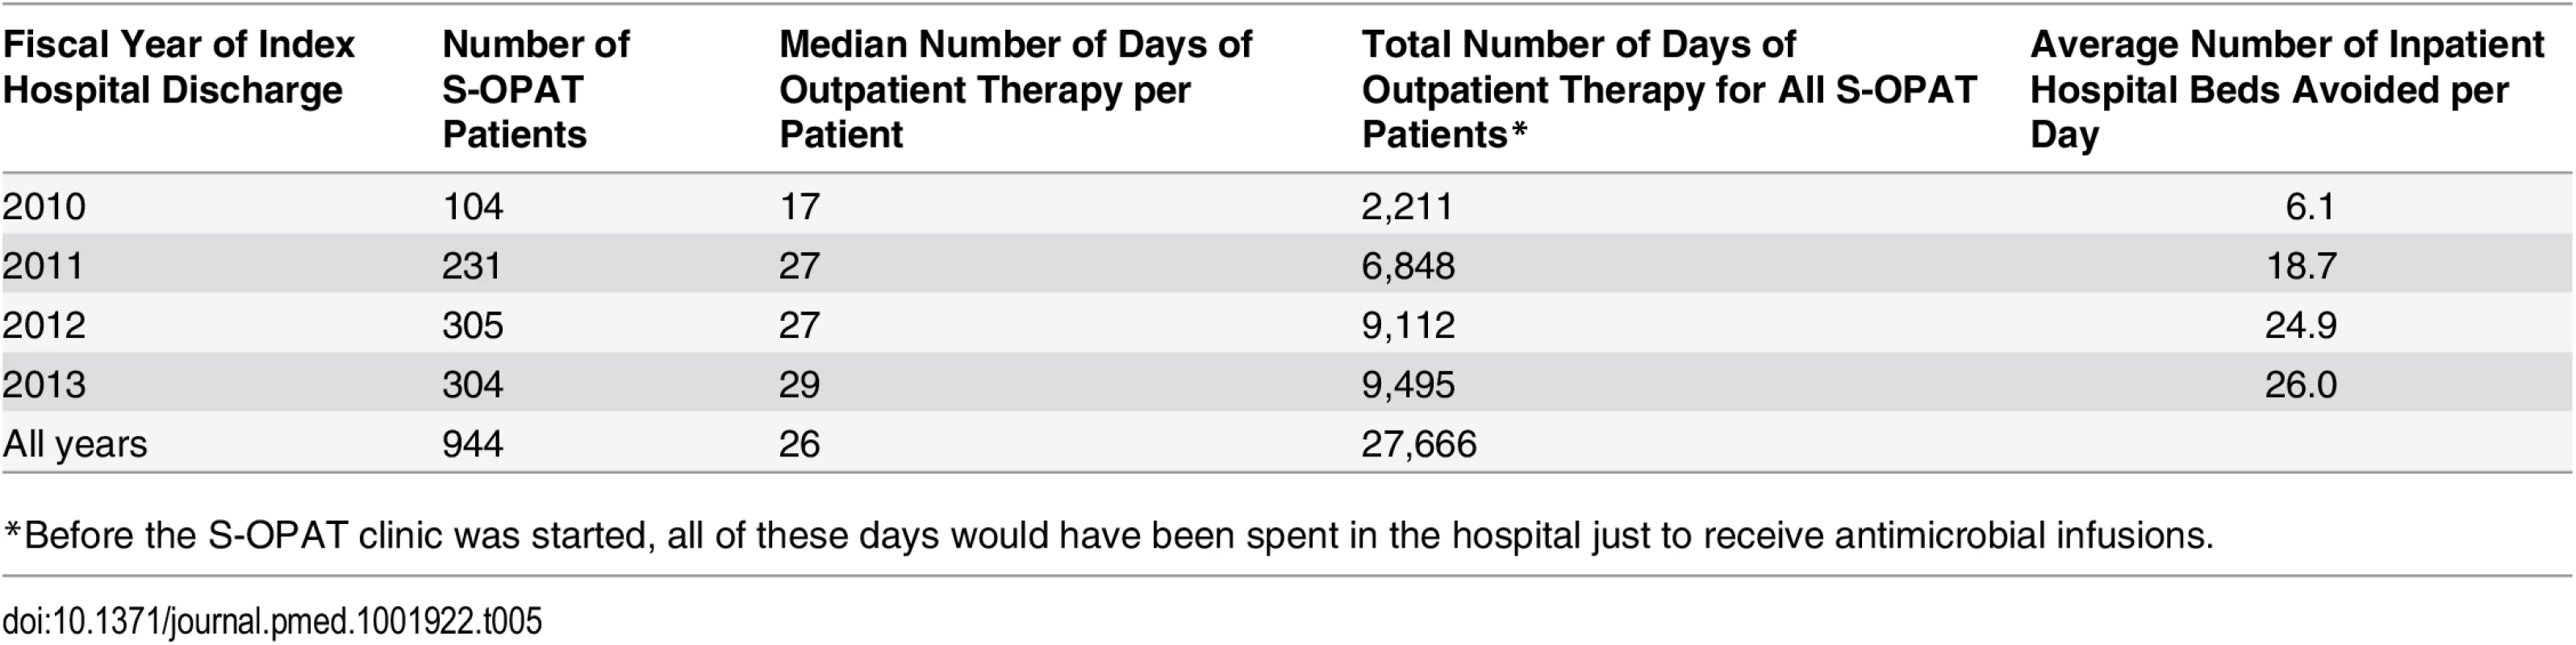 Impact of the self-administered OPAT program on the hospital’s inpatient bed utilization.